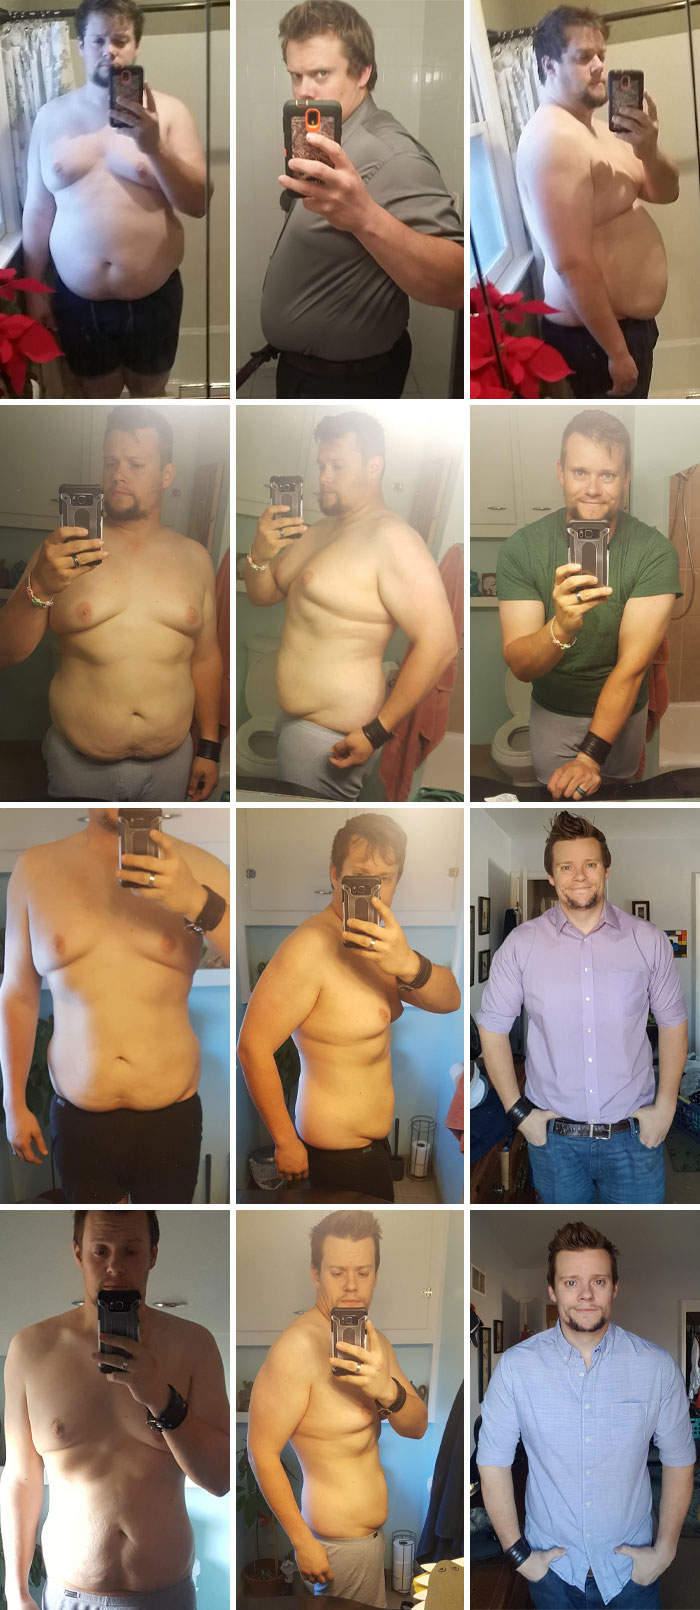 340 Lbs To 233 Lbs. From June 15th To March 1st